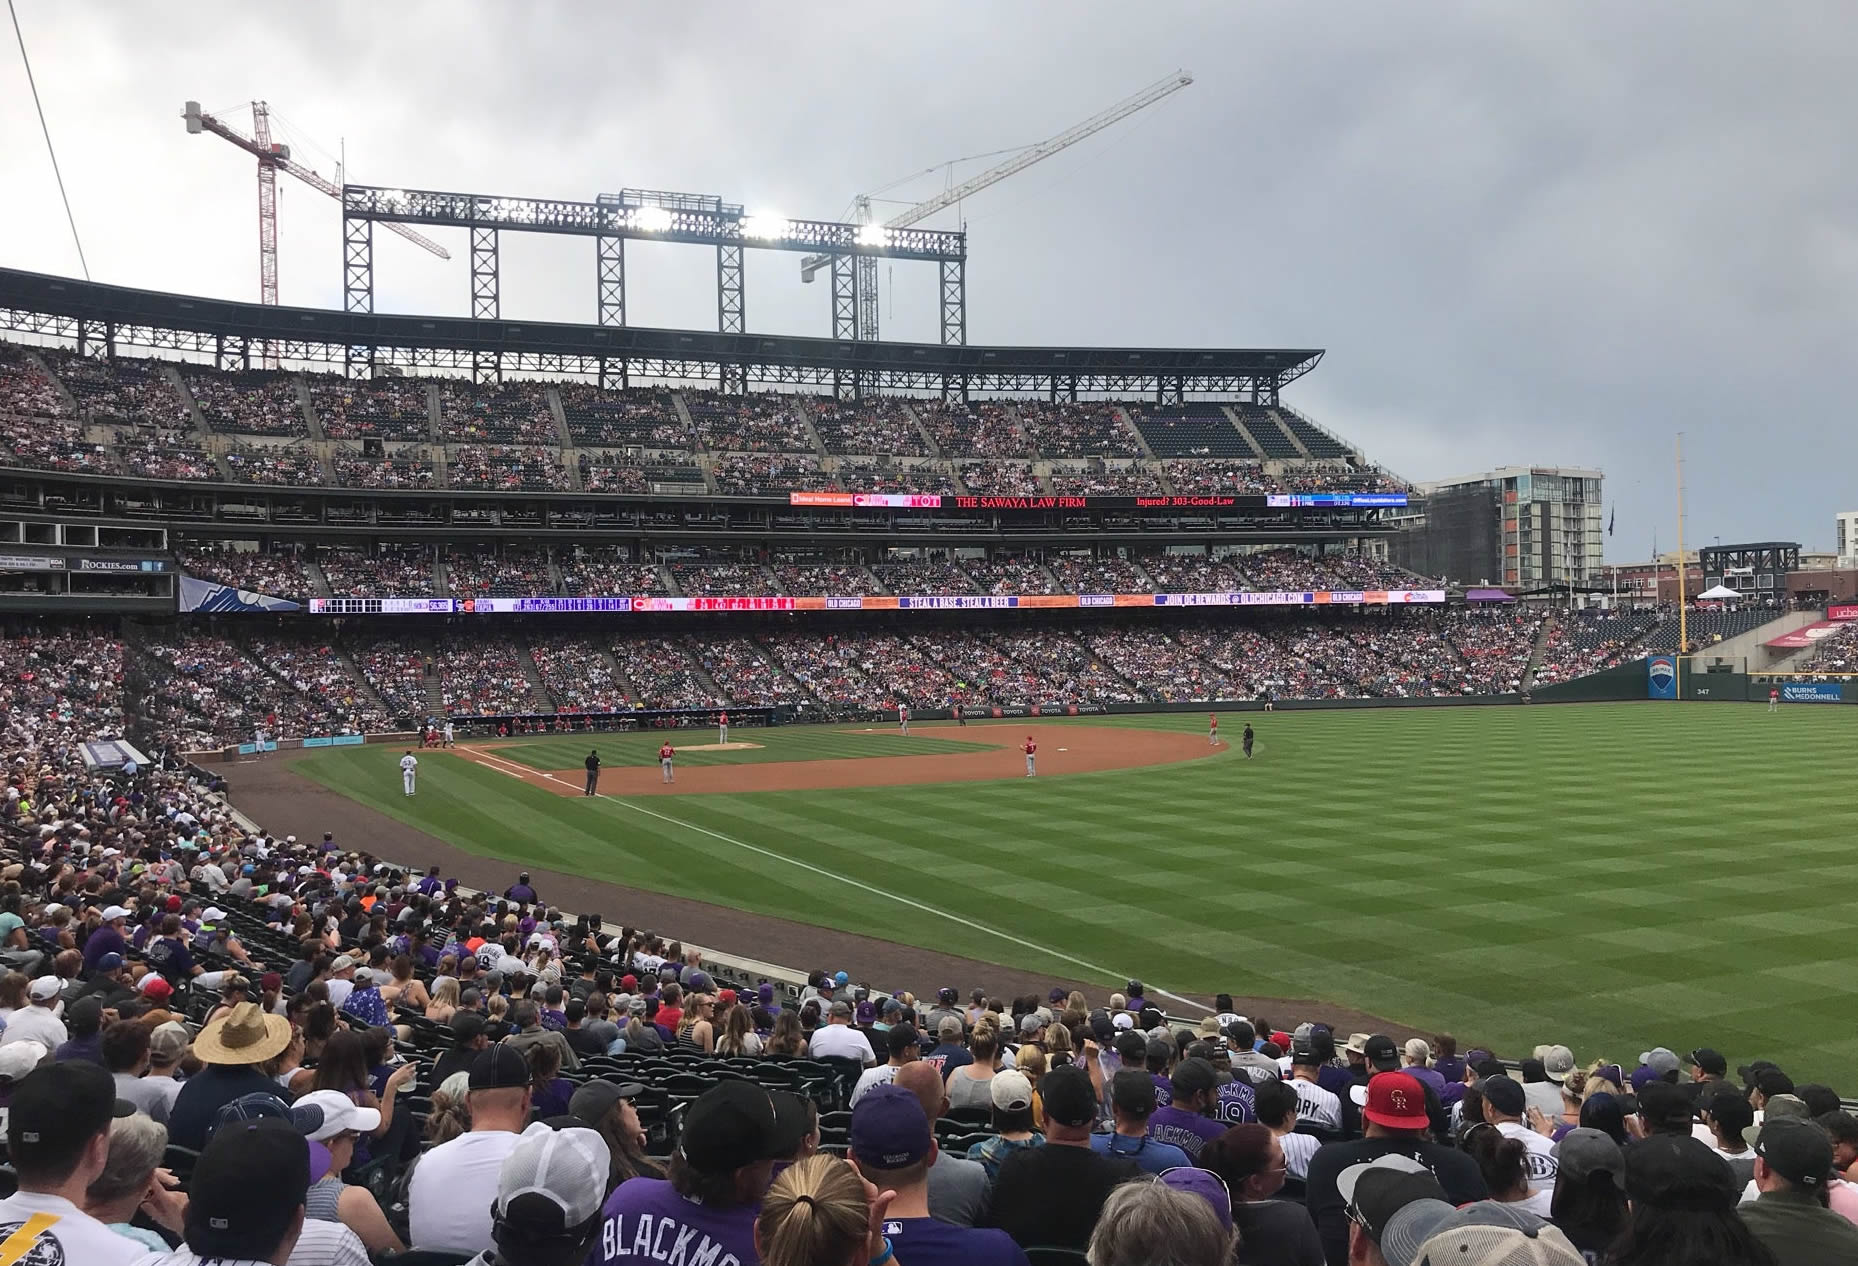 section 111, row 34 seat view  - coors field